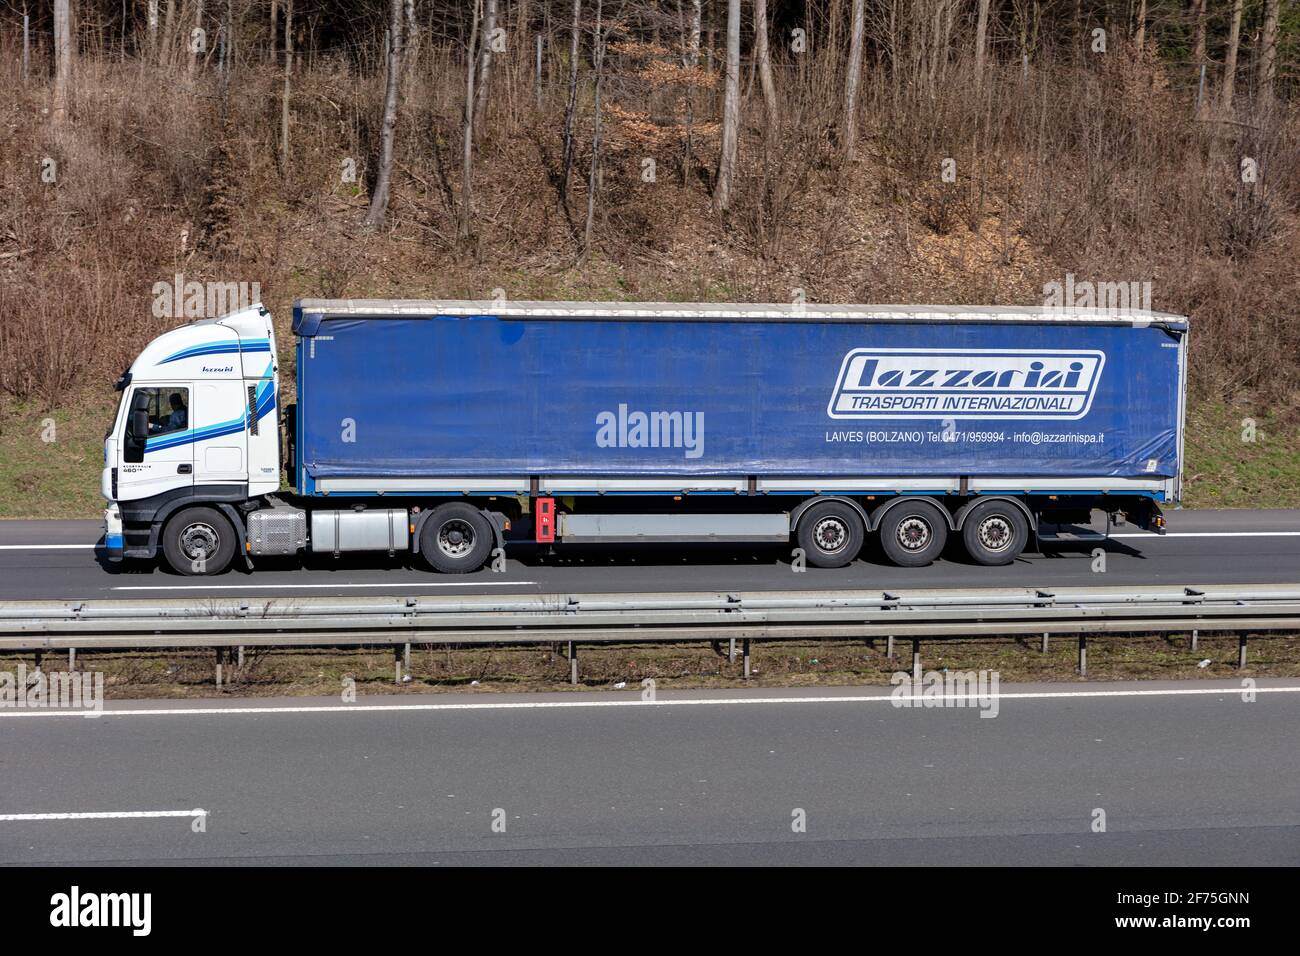 Iveco Stralis High Resolution Stock Photography and Images - Alamy